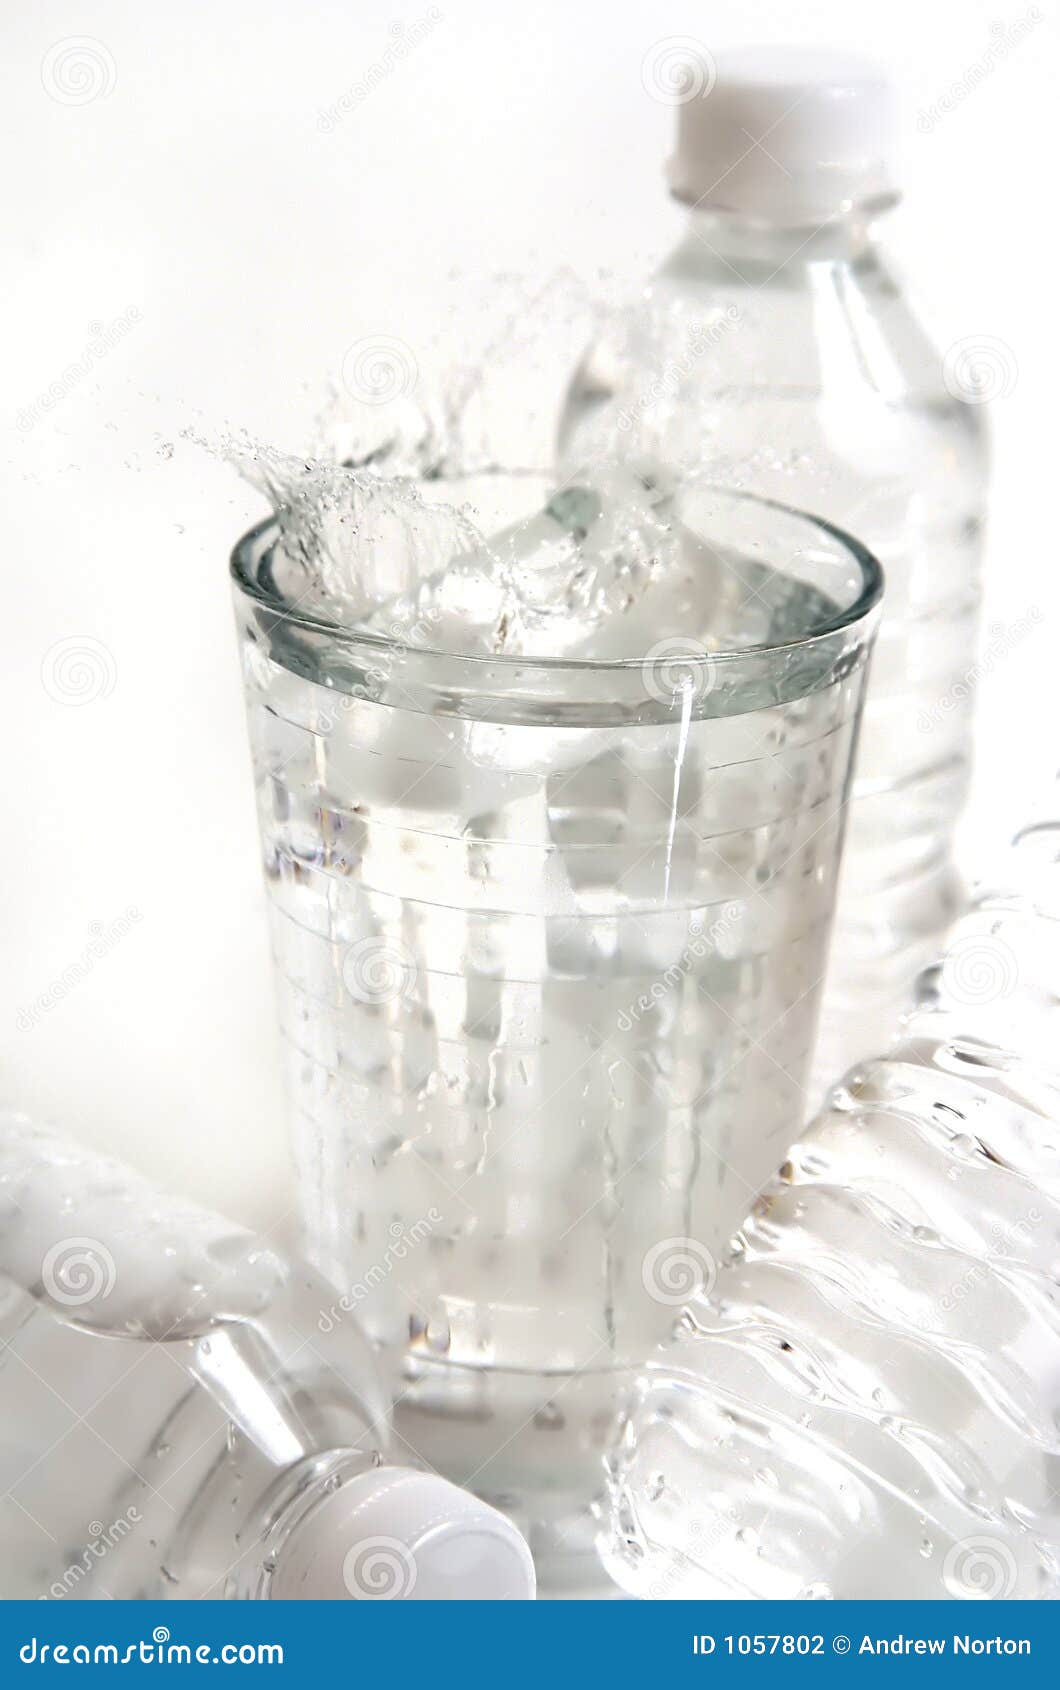 Ice Cold Water stock photo. Image of crisp, clear, clean - 1057802